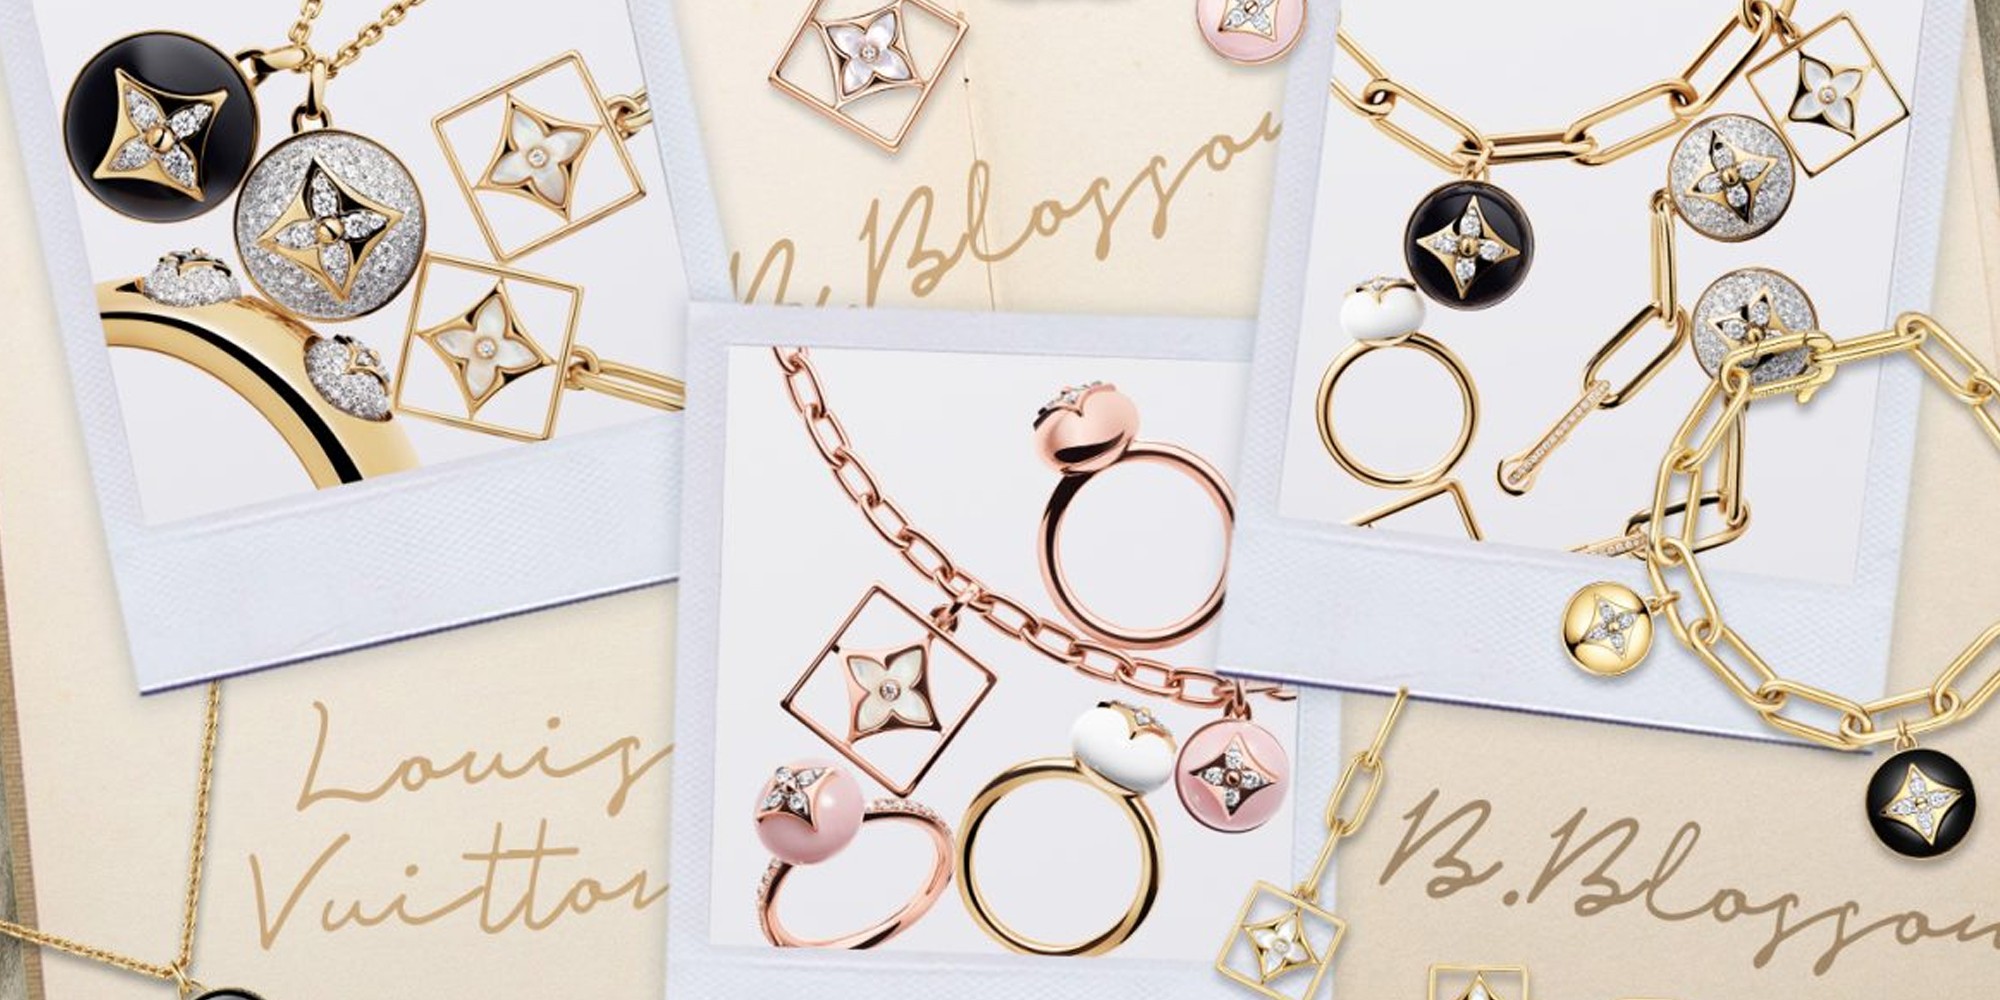 The Designer Behind The New Louis Vuitton B.Blossom Jewellery Collection